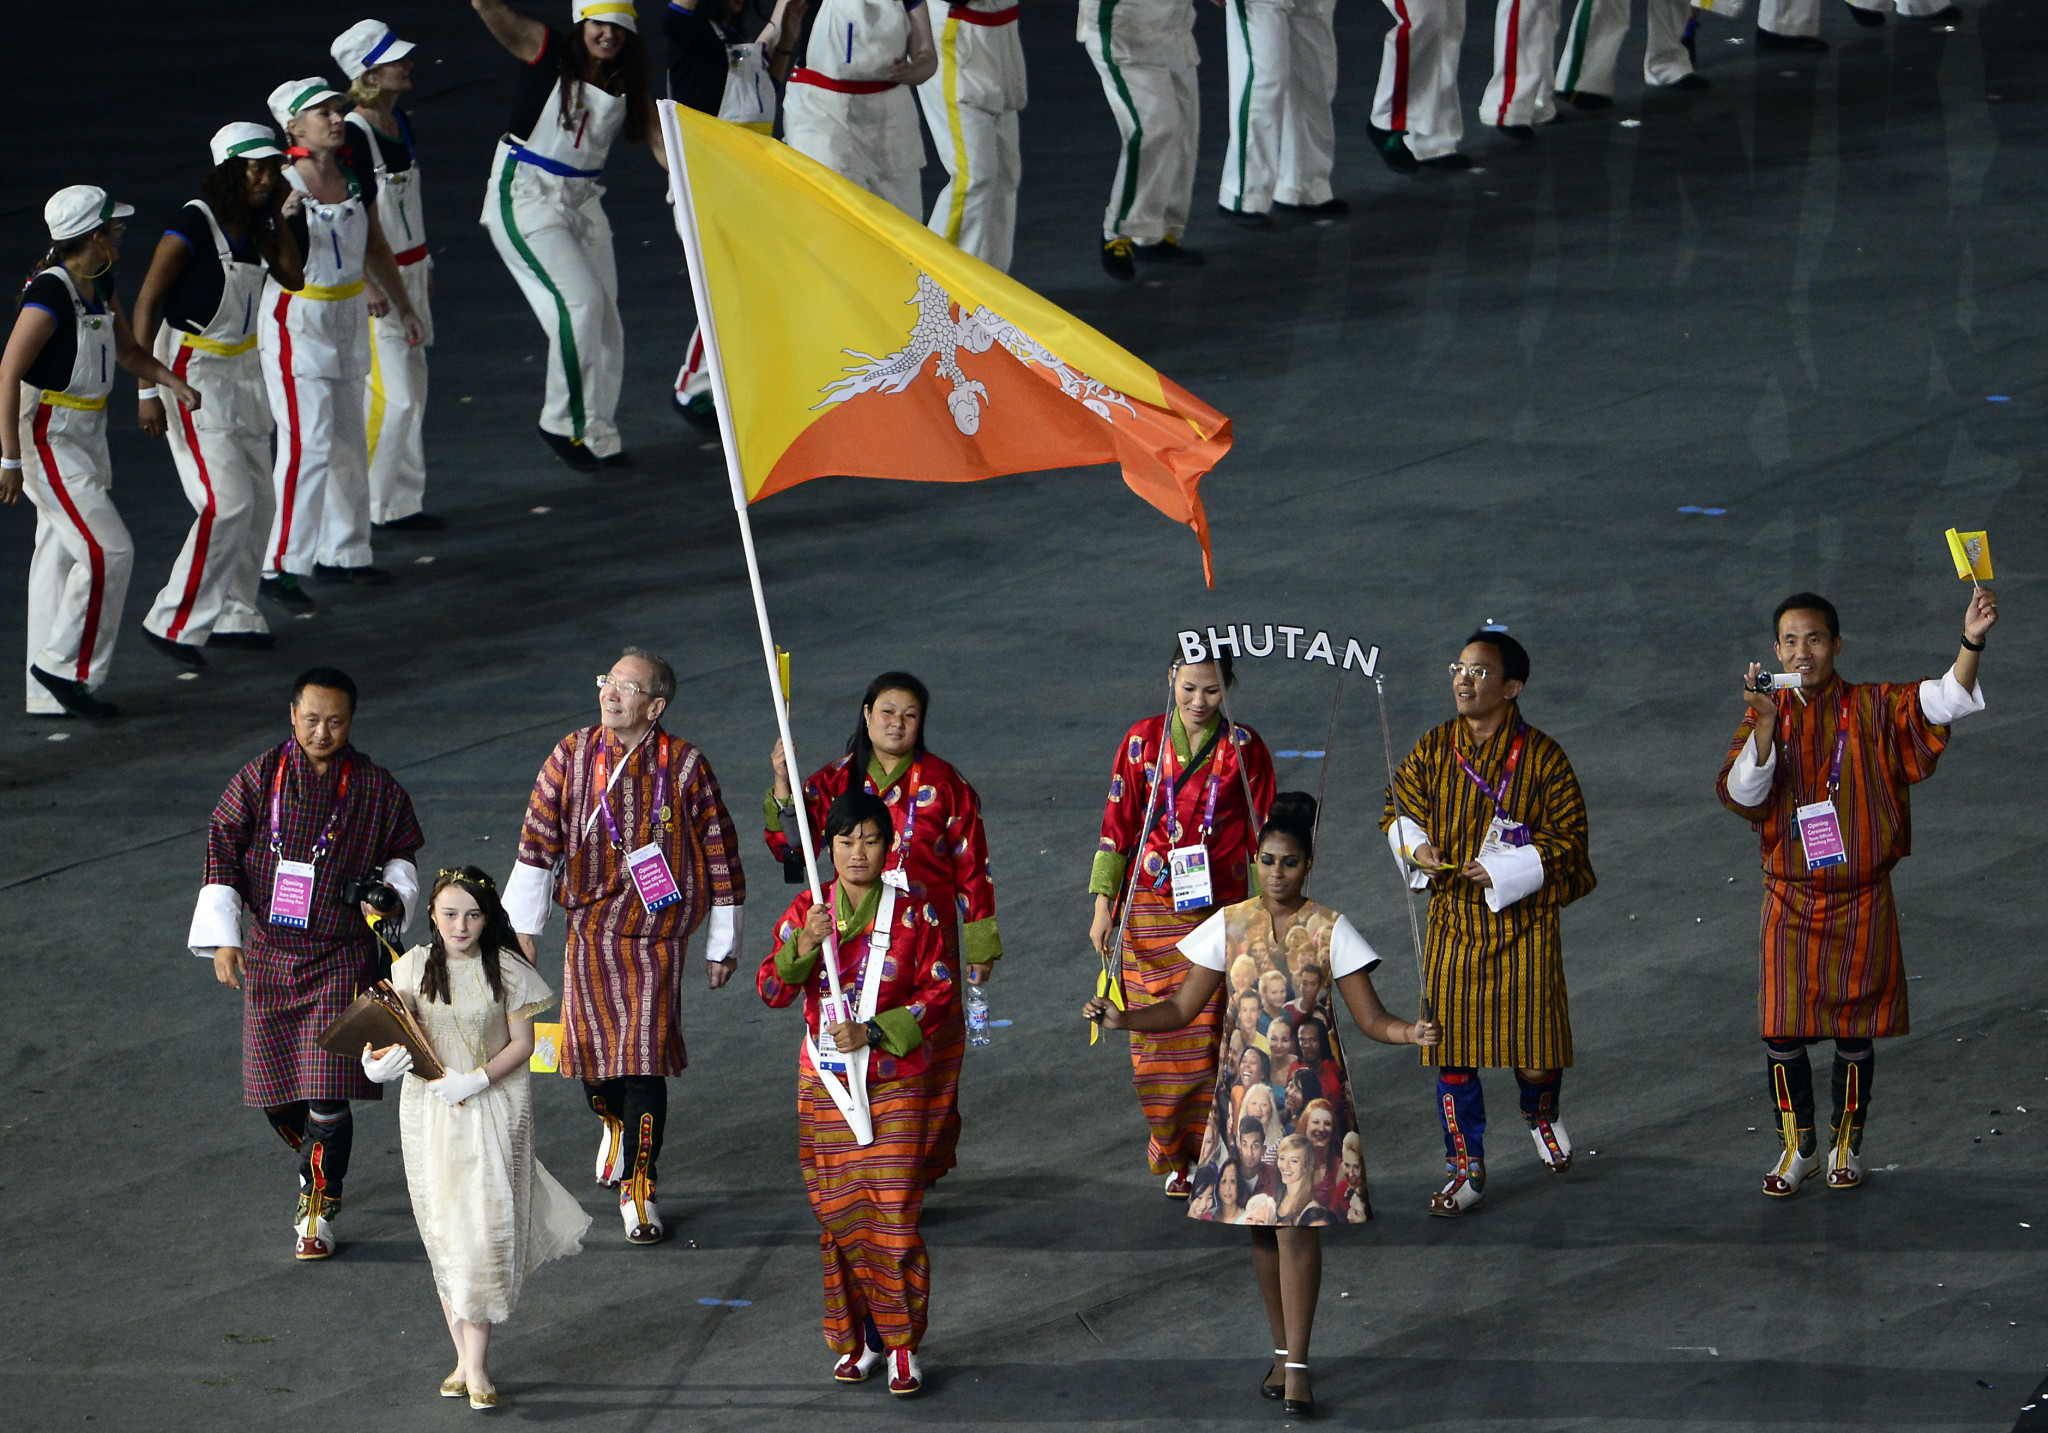 Bhutan, who have competed in every Summer Olympic Games since making their debut at Los Angeles 1984, have drawn up a long-term strategic plan ©Getty Images